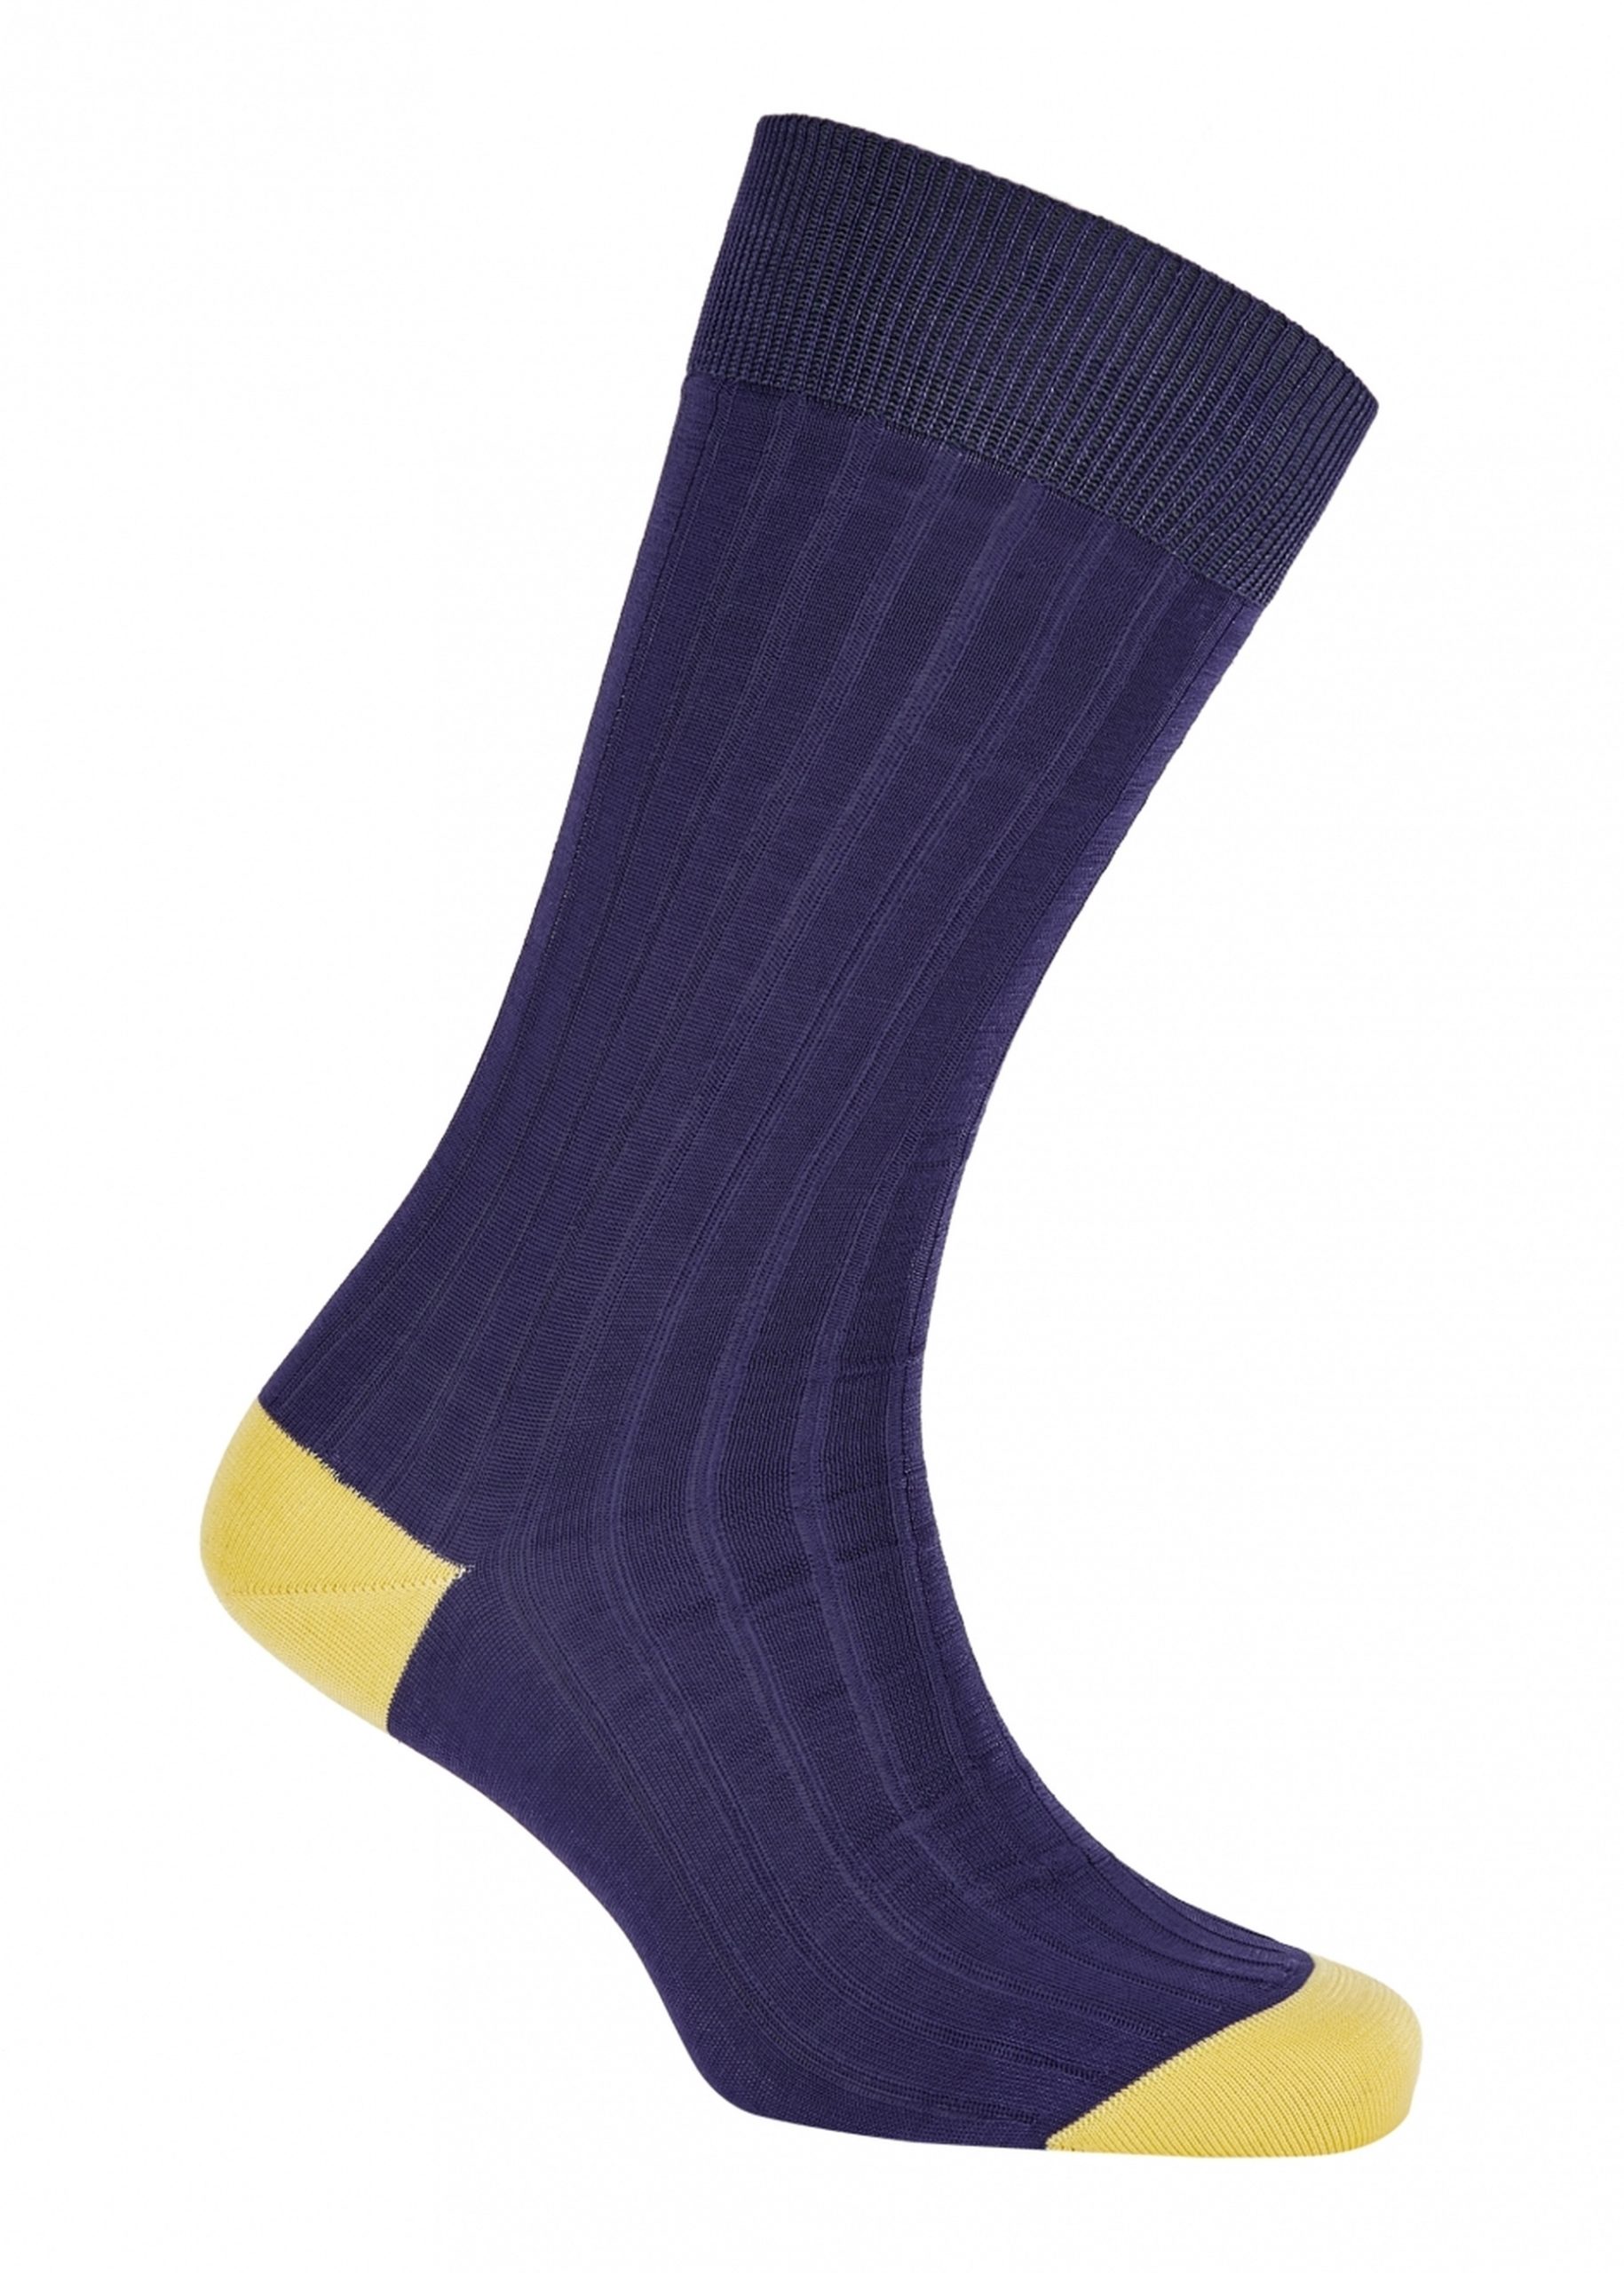 Blue and yellow men’s cotton socks